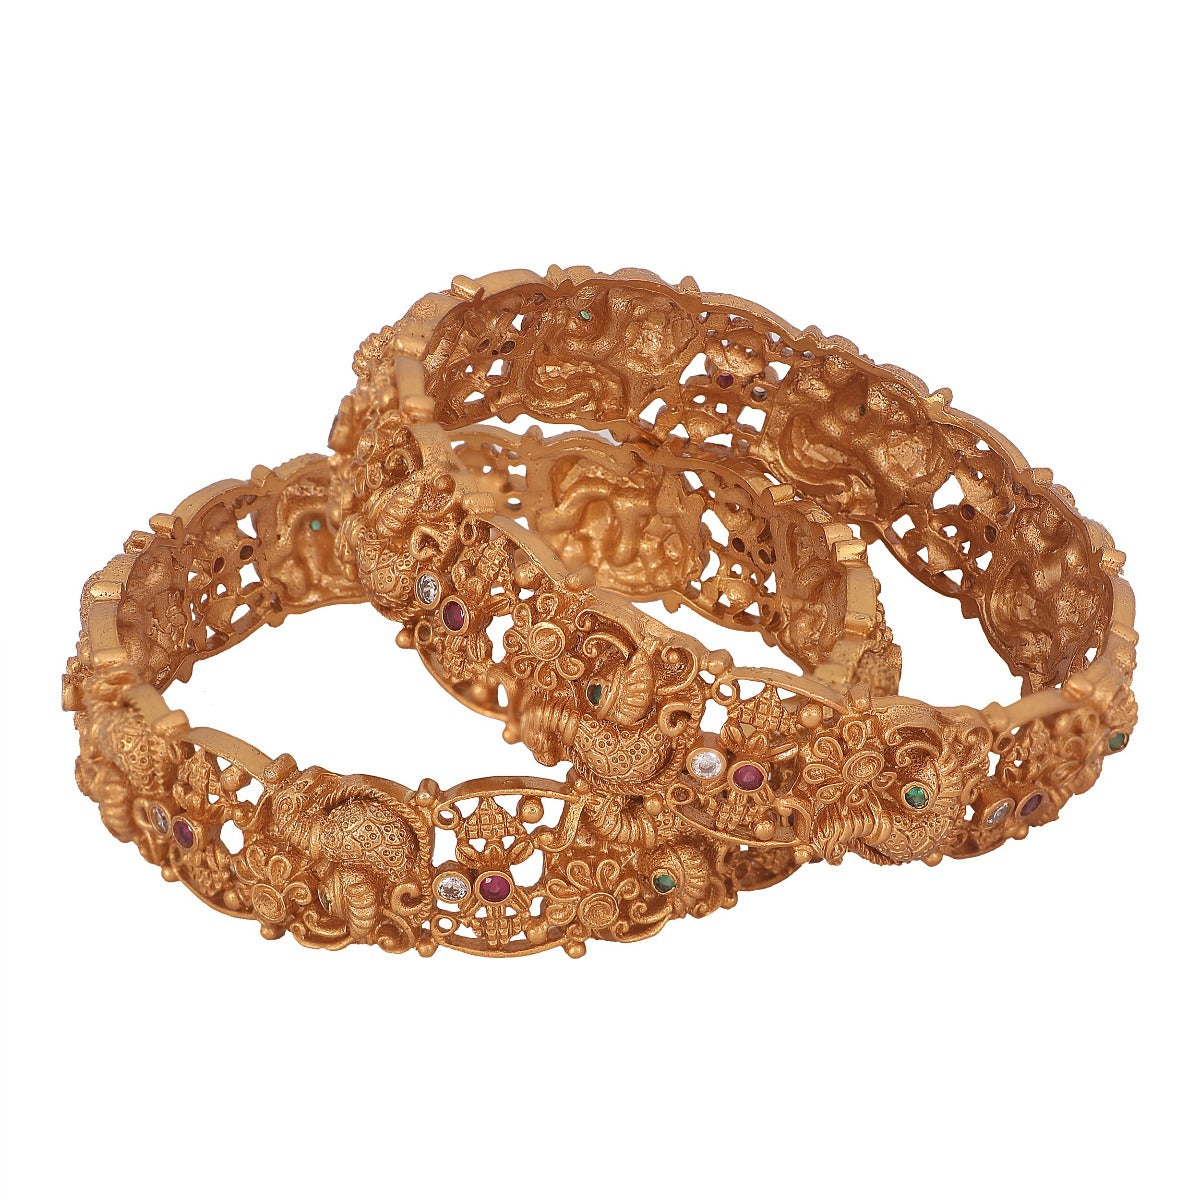 Bangles and Bracelets Upto 87% OFF: Buy Fashion Bangles and Bracelets Online  for Women - Snapdeal